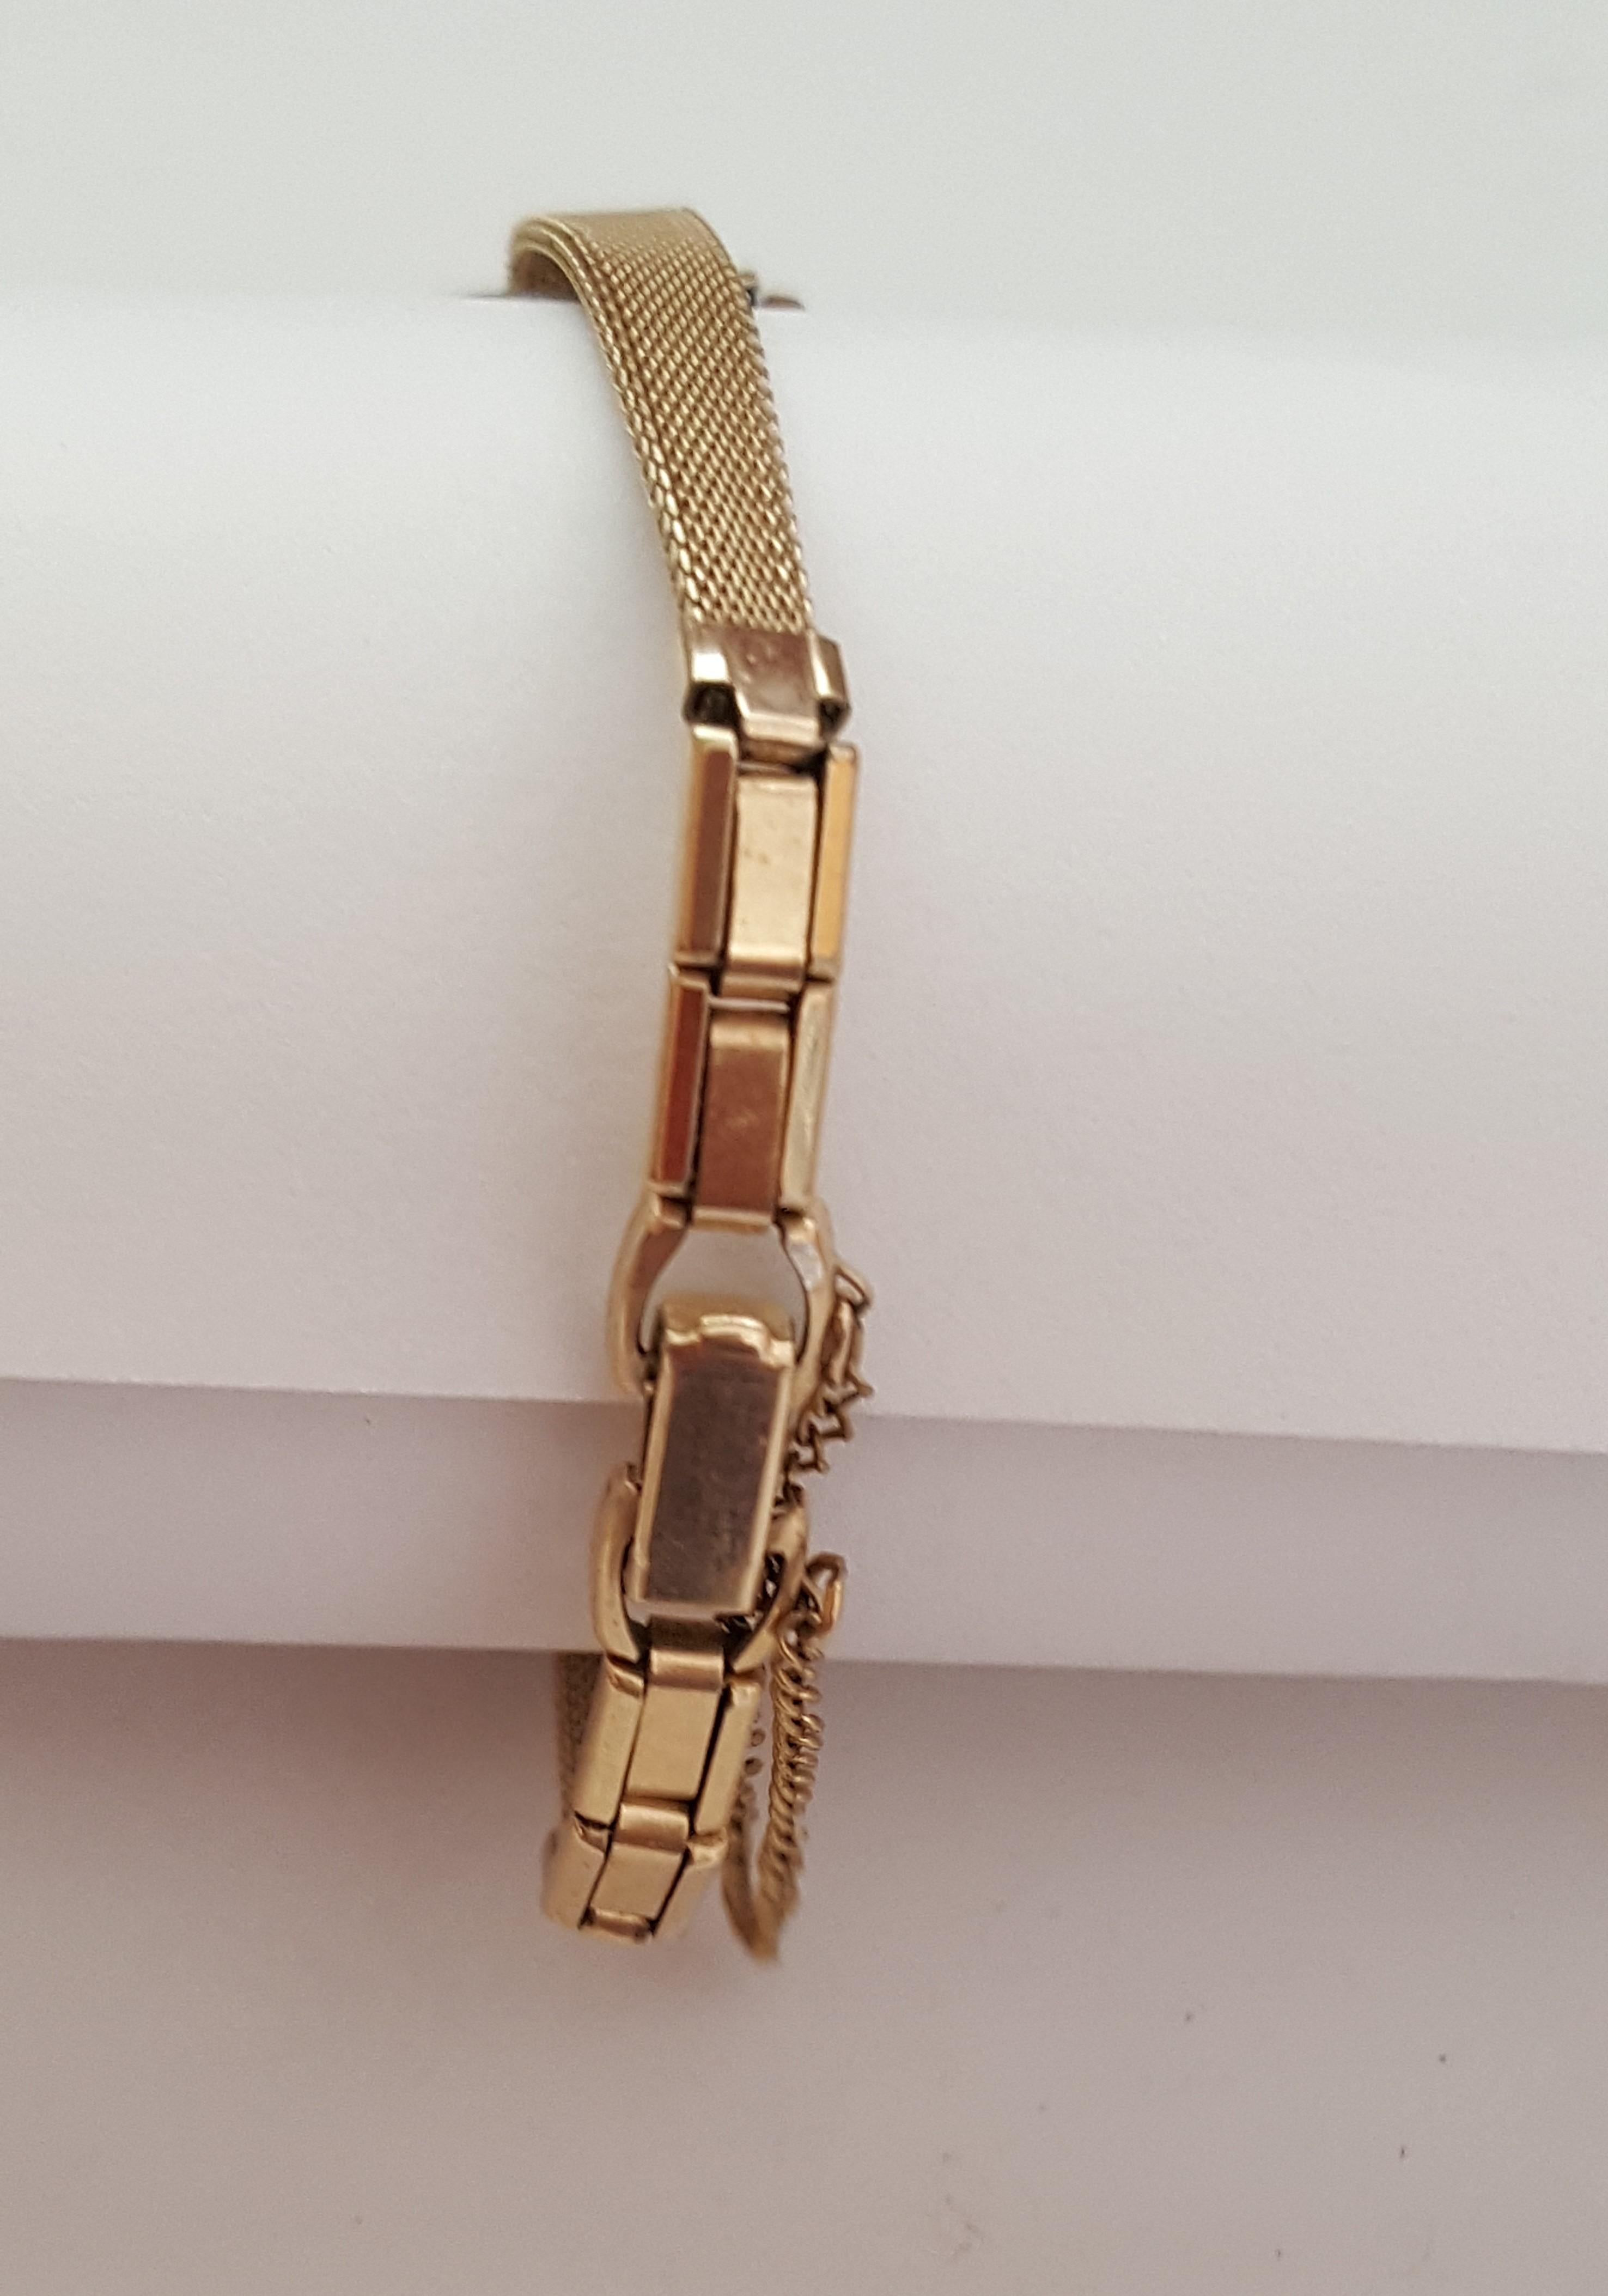 Vintage Ladies Hamilton 24mm Case Gold Plated Watch, Wind Movement Watch, Working, Model 26035-4, 1980's, Round White Face, Black Numerals, Gold, 5 inch bracelet, 10kt gold plated bracelet, with safety chain. Petite band is 5 inches total with fold